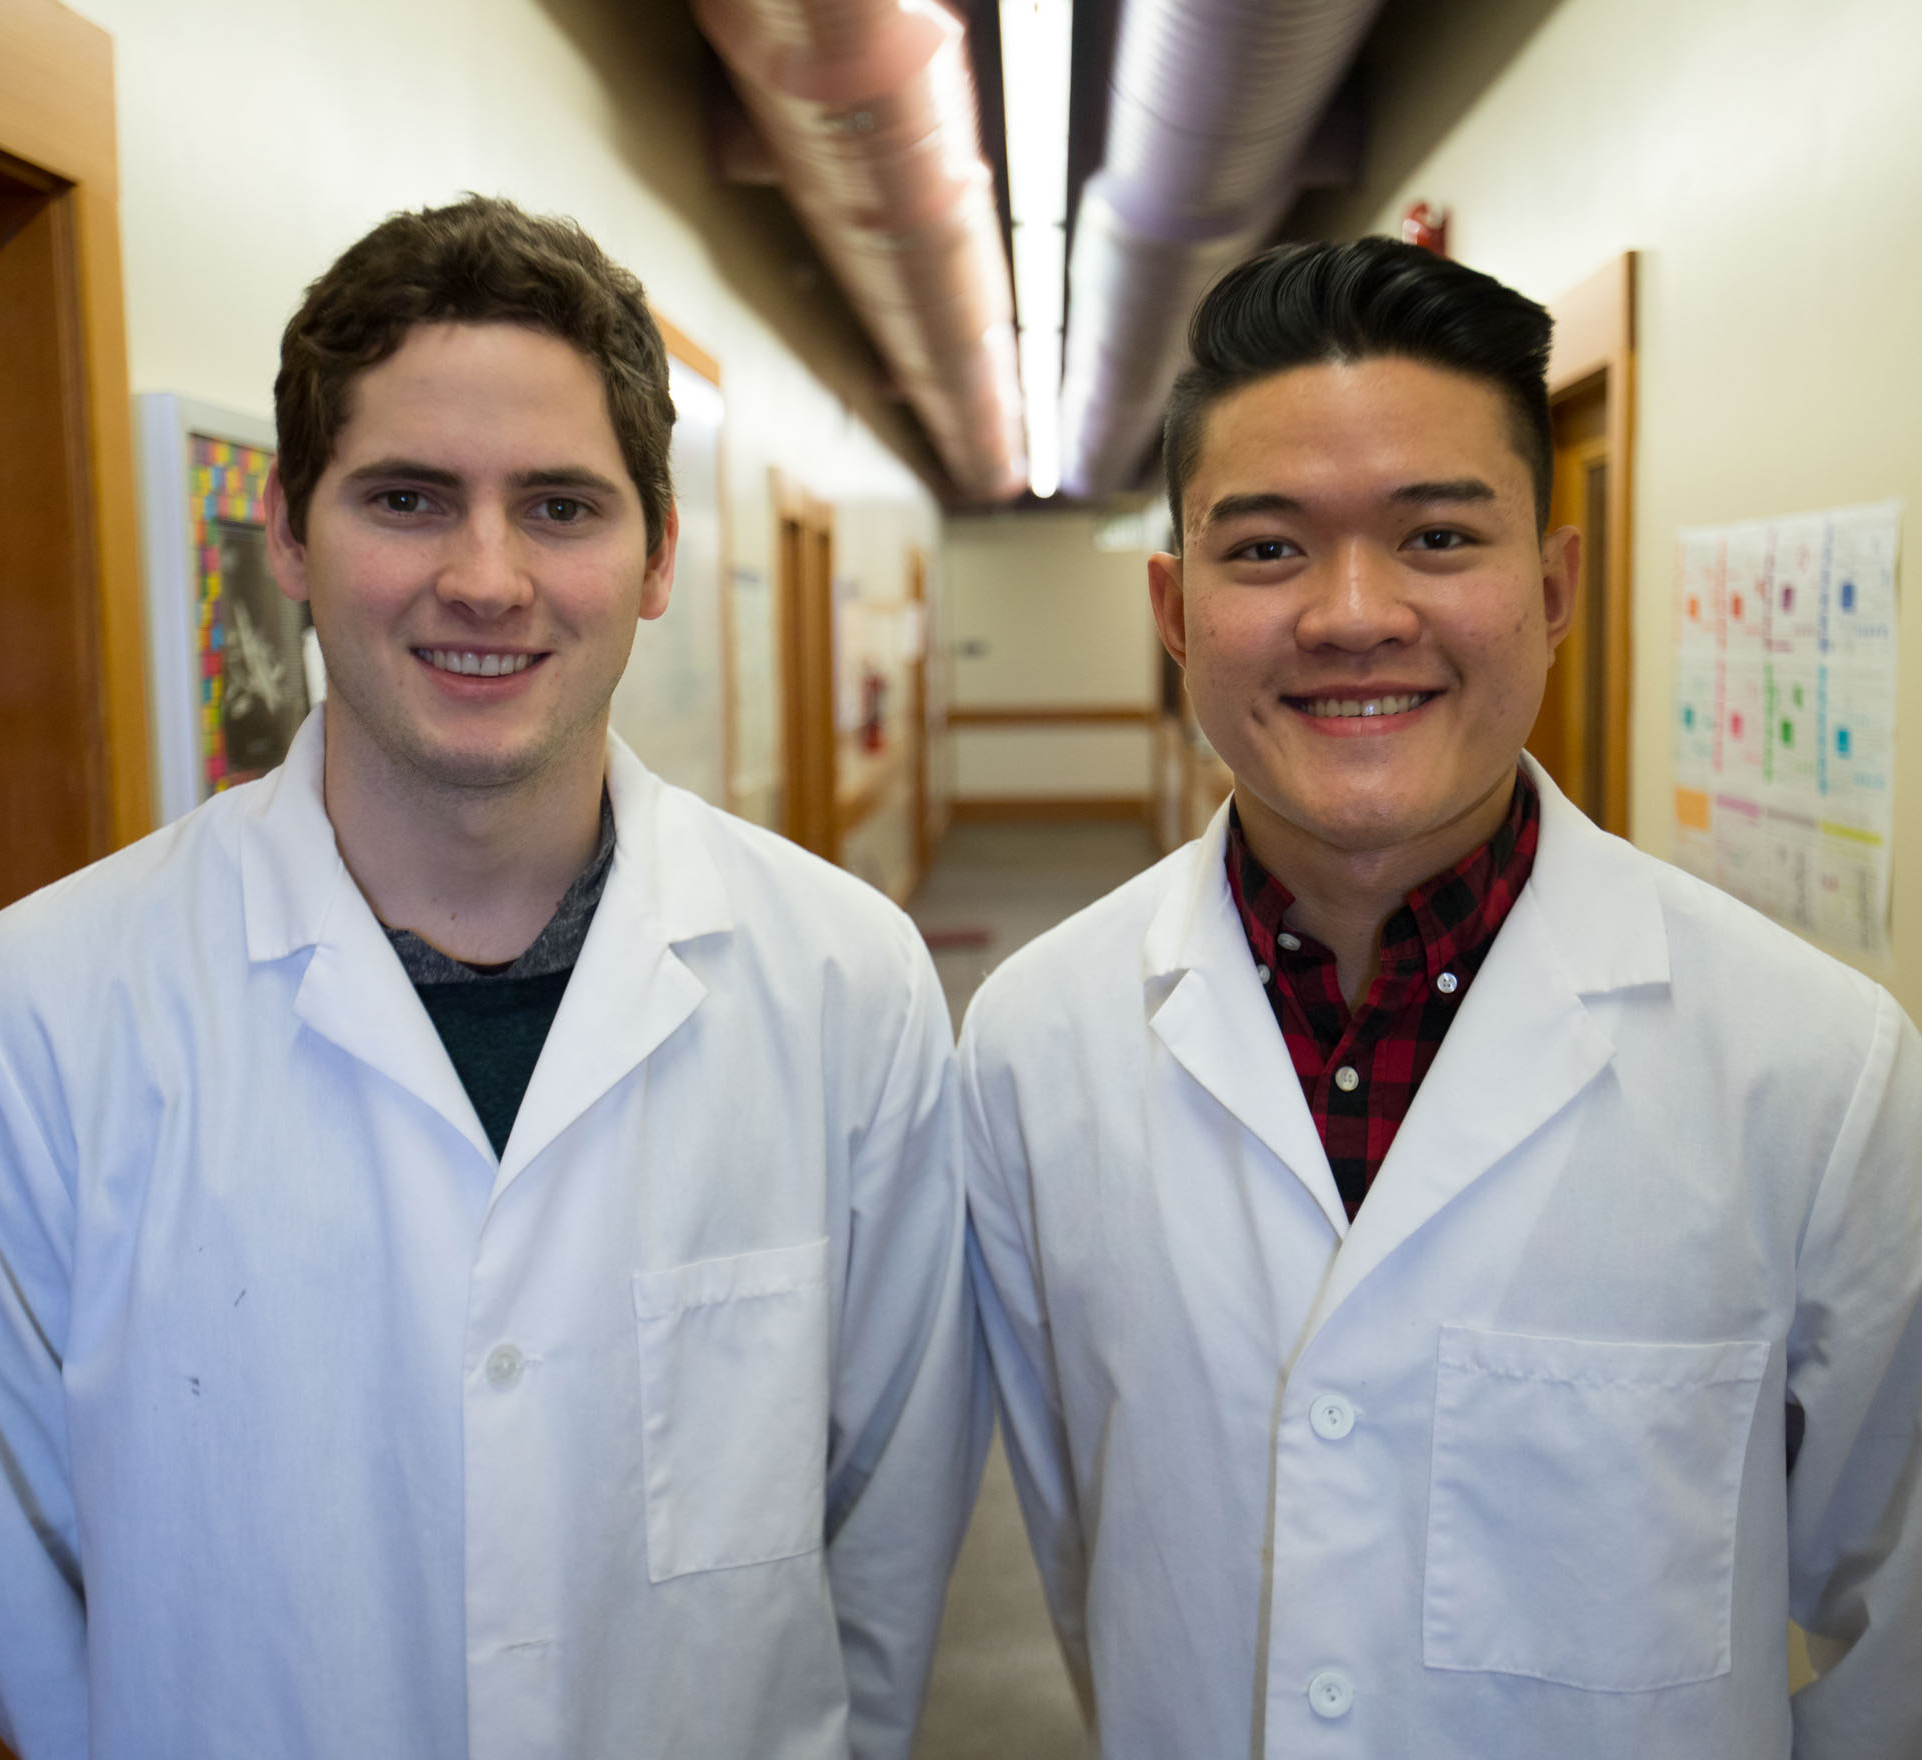 Pacific University chemistry majors Keillan MacCulloch '19 and Hoan Nguyen '19